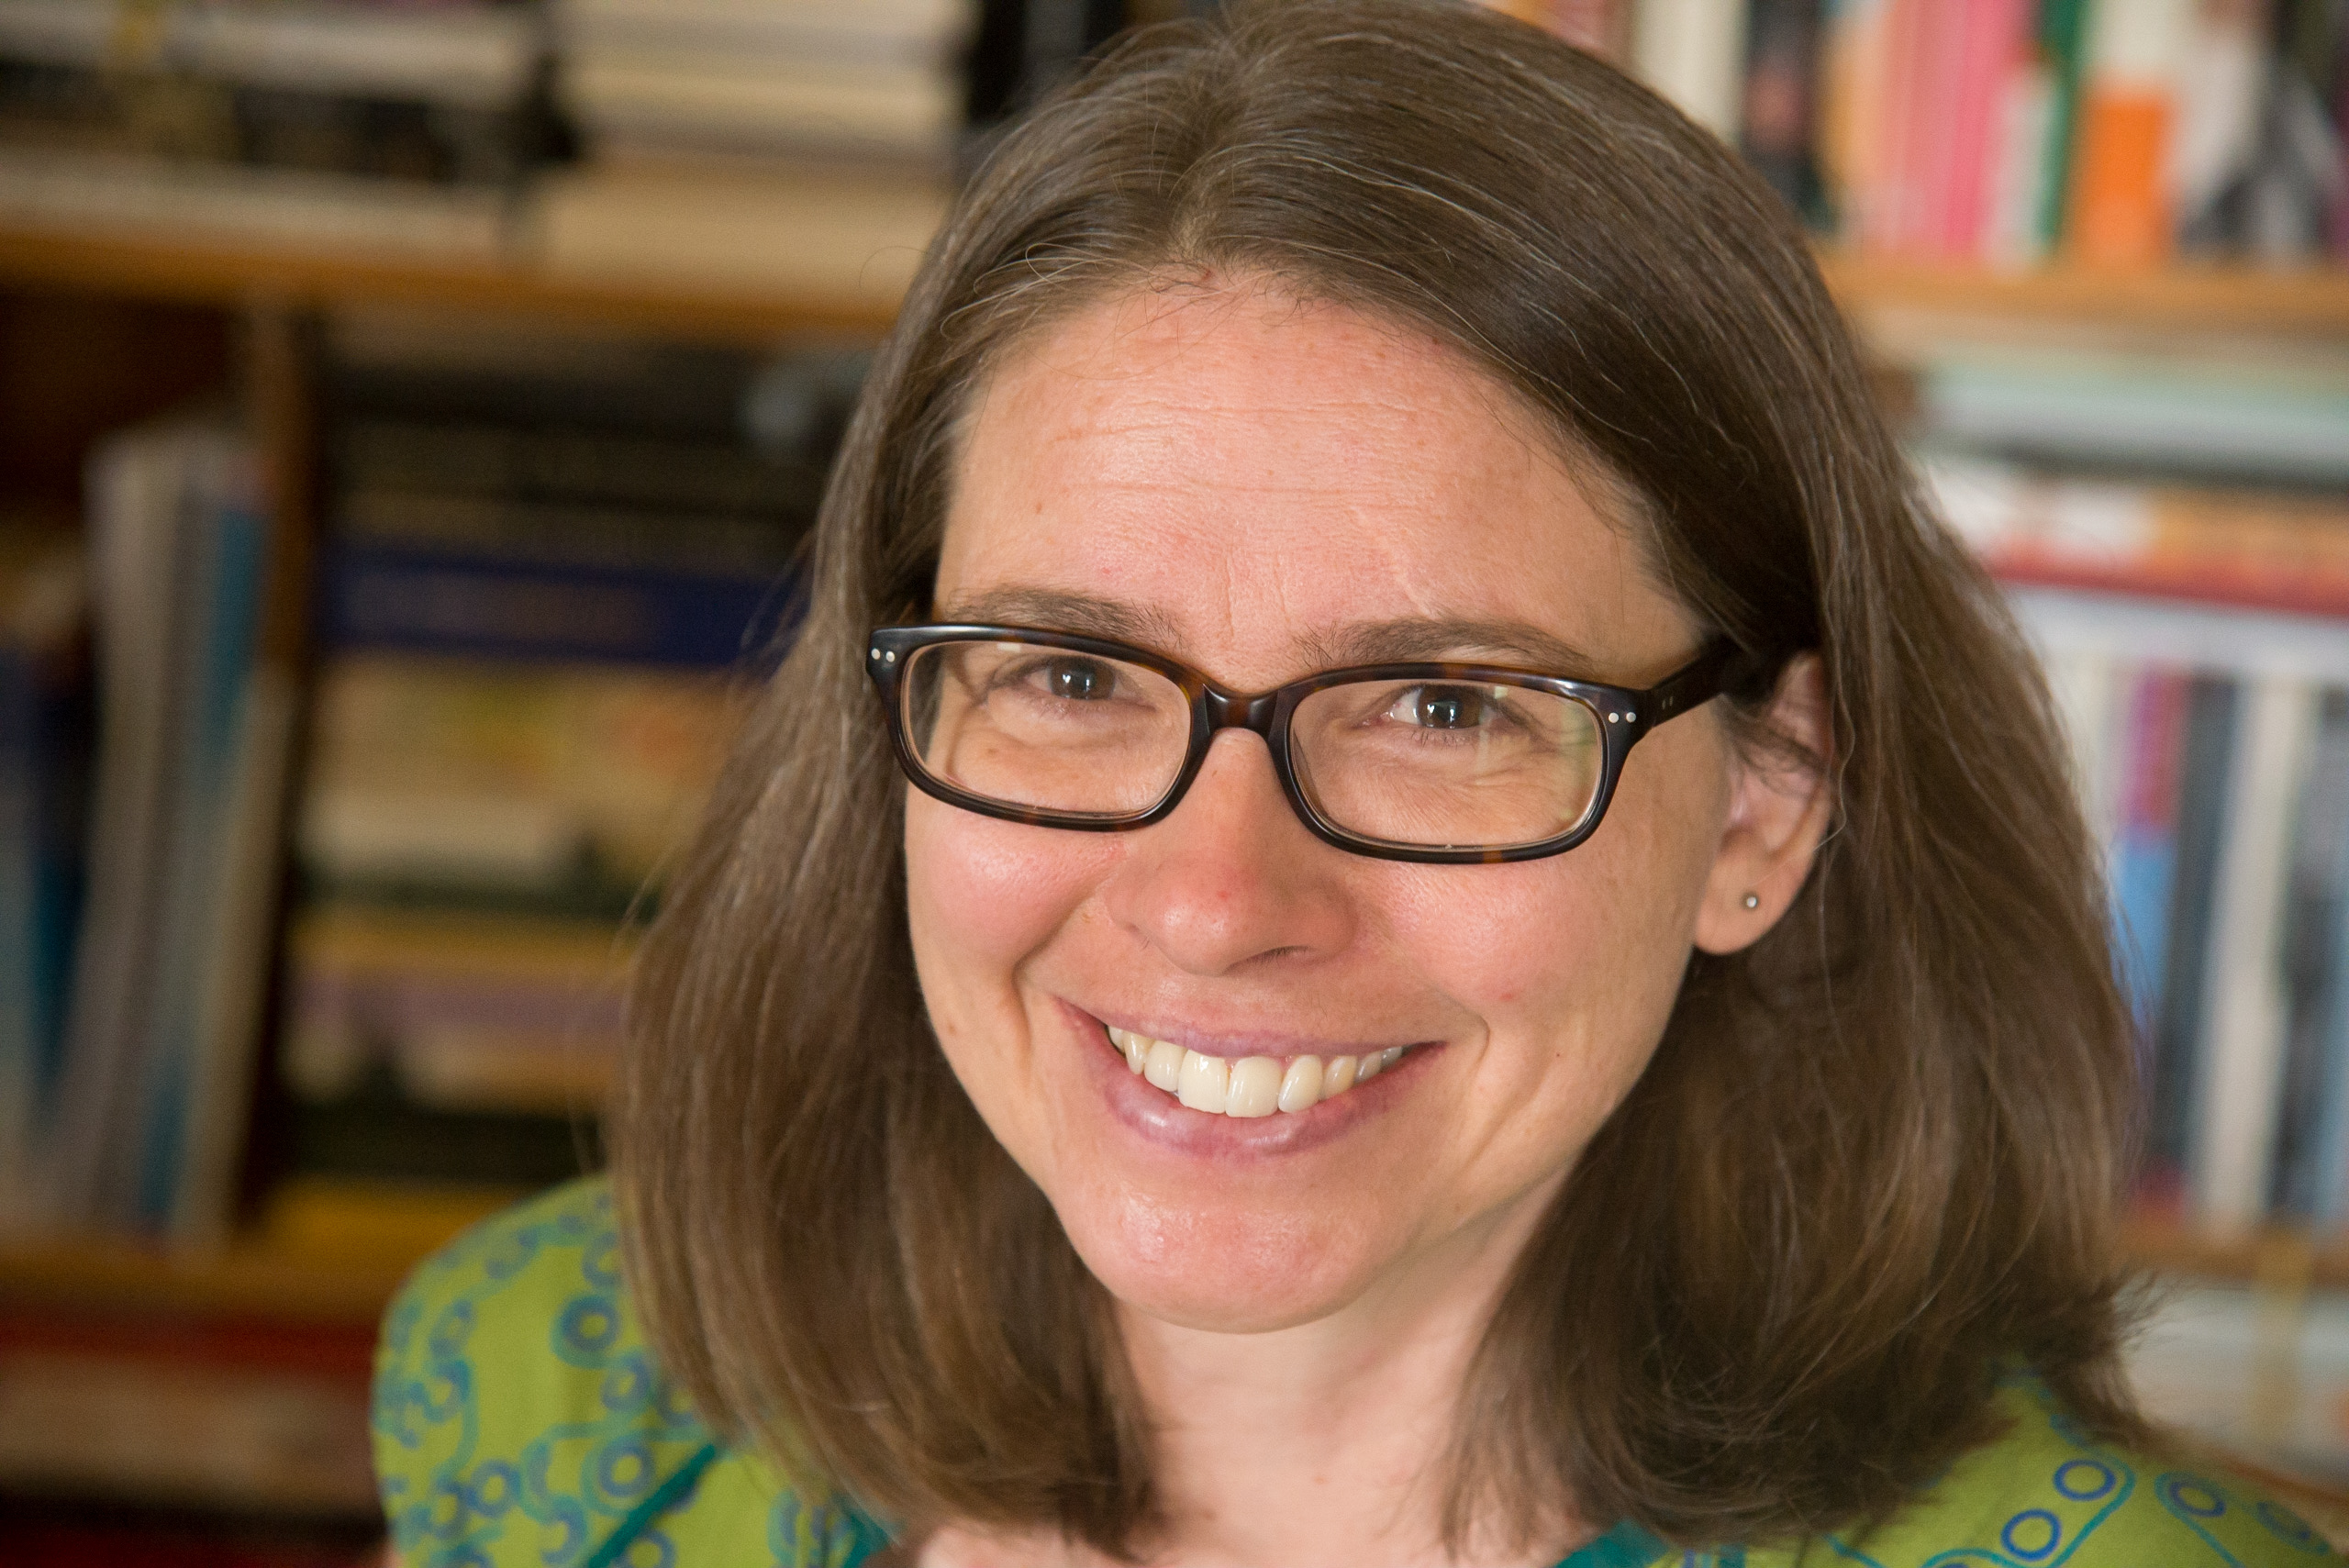 A white woman with shoulder-length brown hair and glasses smiles at the camera. Behind her are books on bookshelves.